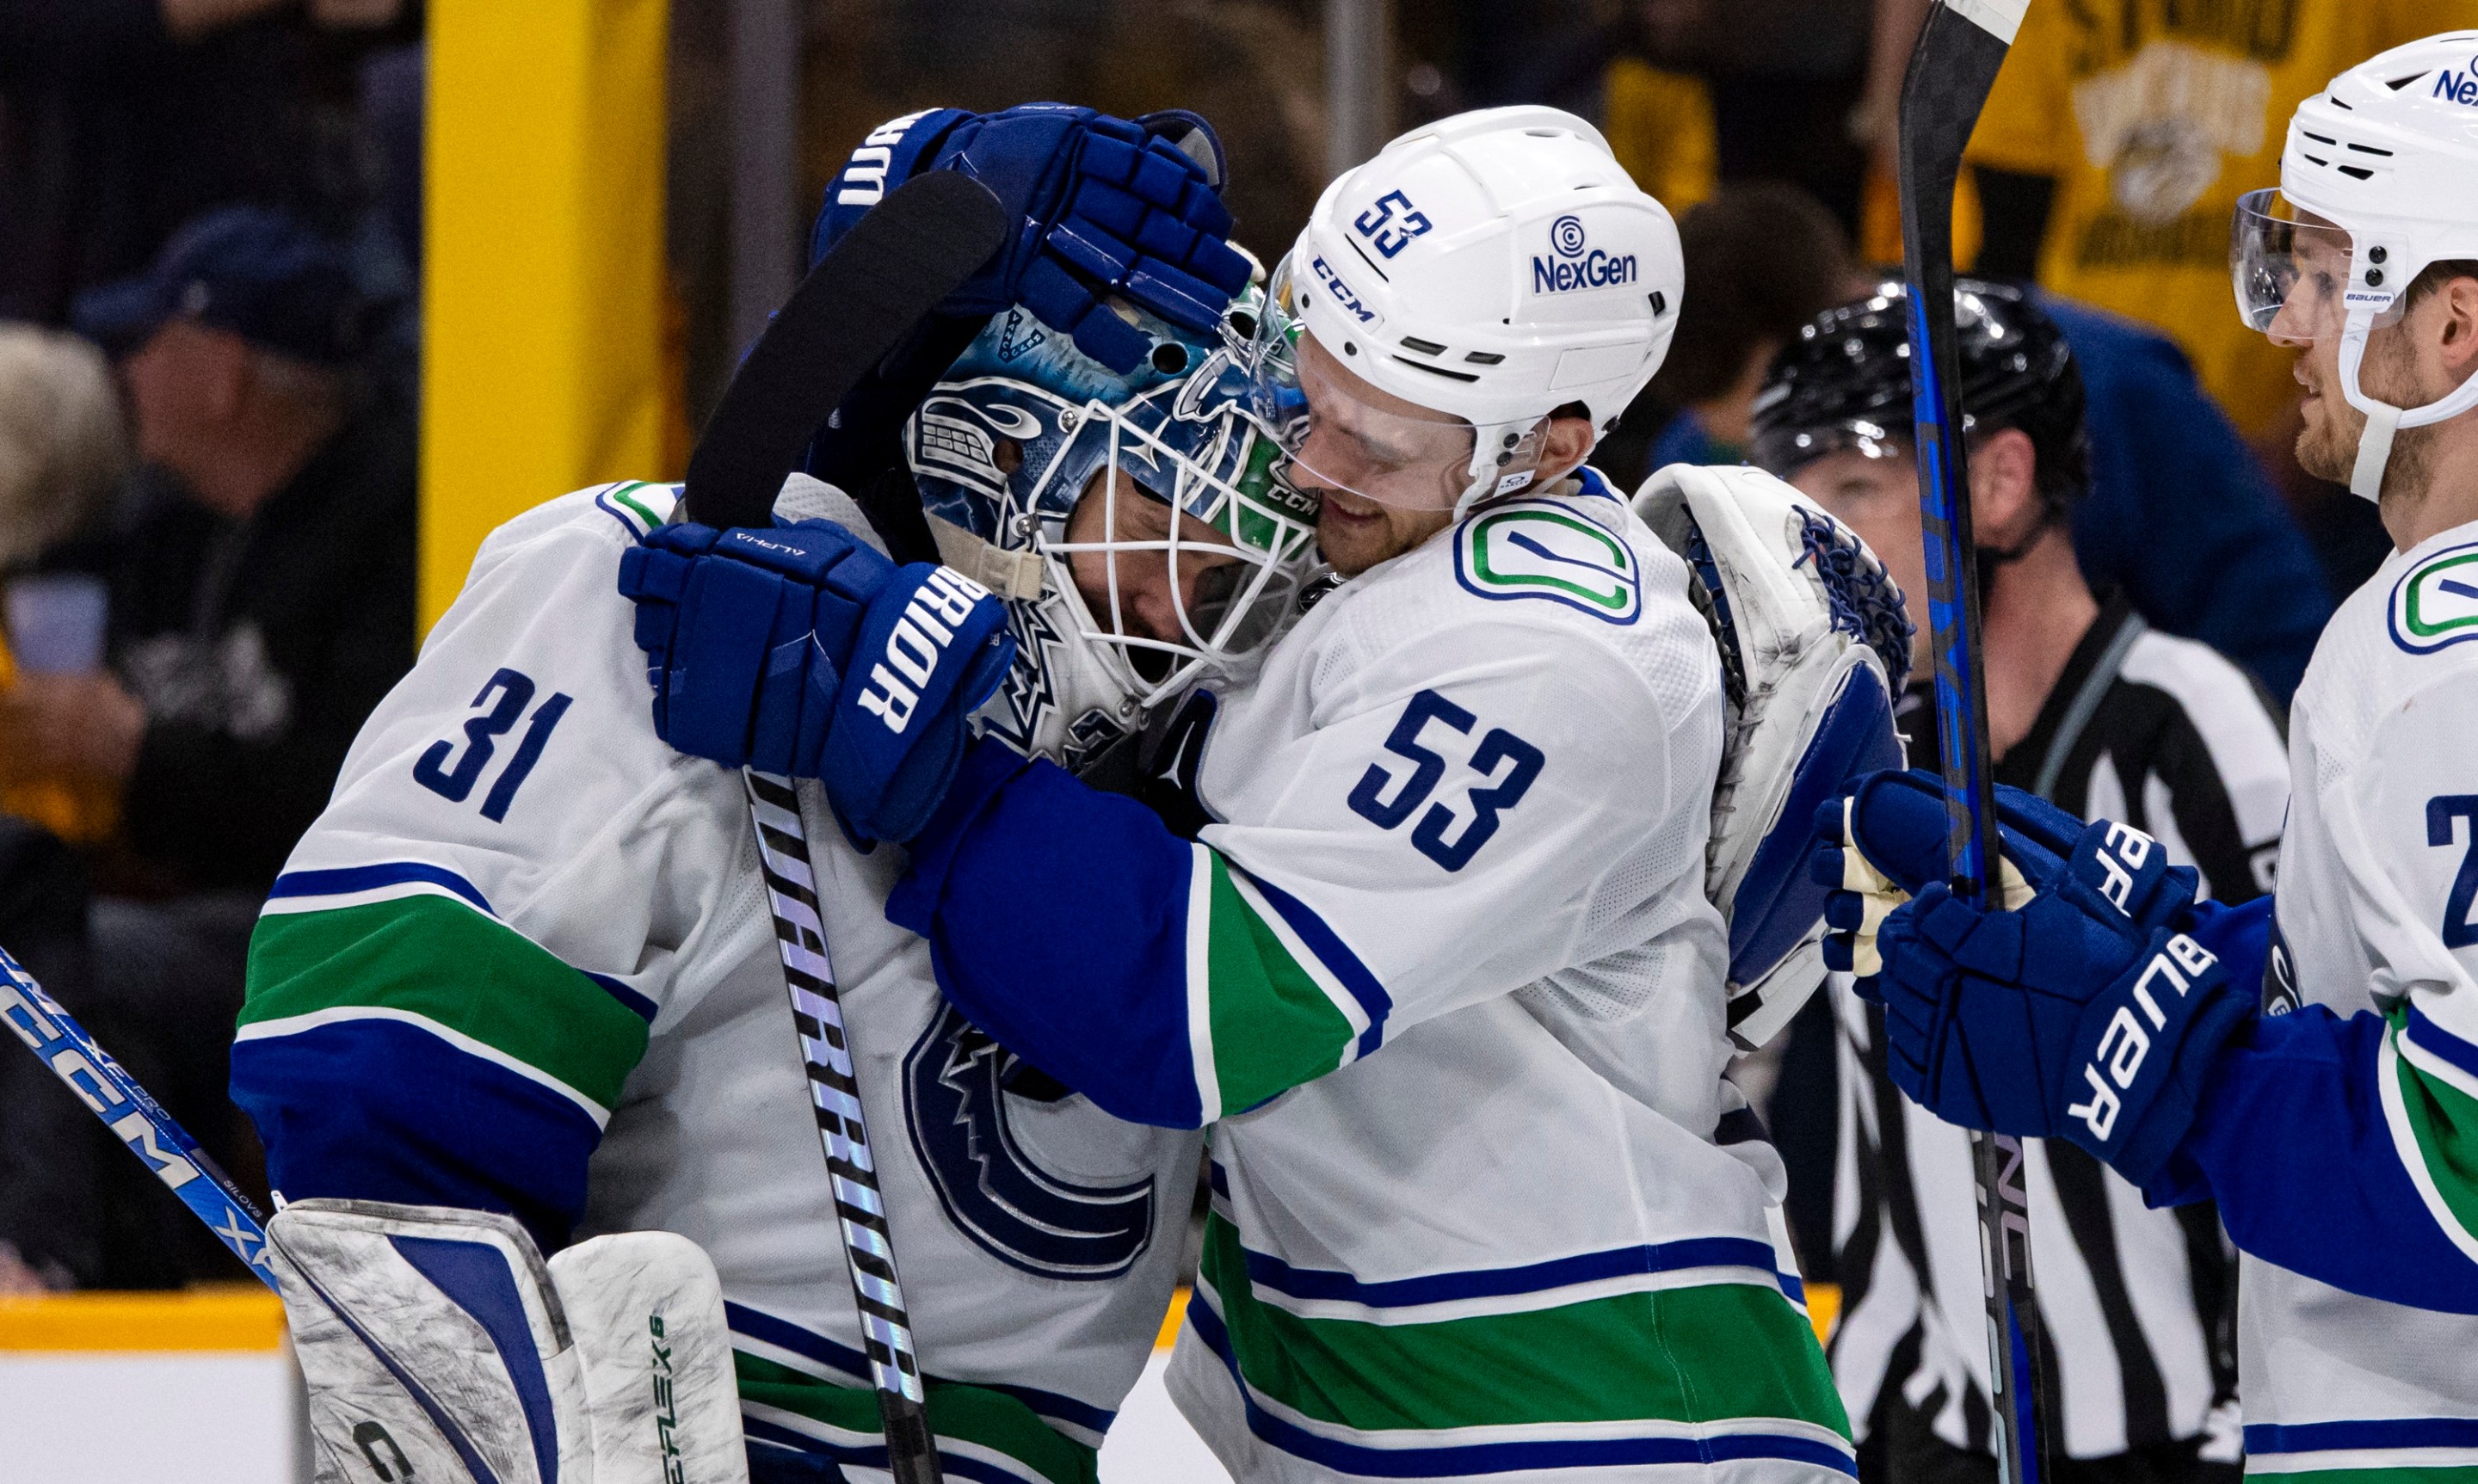 NASHVILLE, TENNESSEE - APRIL 28: Arturs Silovs #31 and Teddy Blueger #53 of the Vancouver Canucks celebrate after defeating the Nashville Predators during overtime of Game Four of the First Round of the 2024 Stanley Cup Playoffs at Bridgestone Arena on April 28, 2024 in Nashville, Tennessee. (Photo by Brett Carlsen/Getty Images) *** Local Caption *** Arturs Silovs; Teddy Blueger